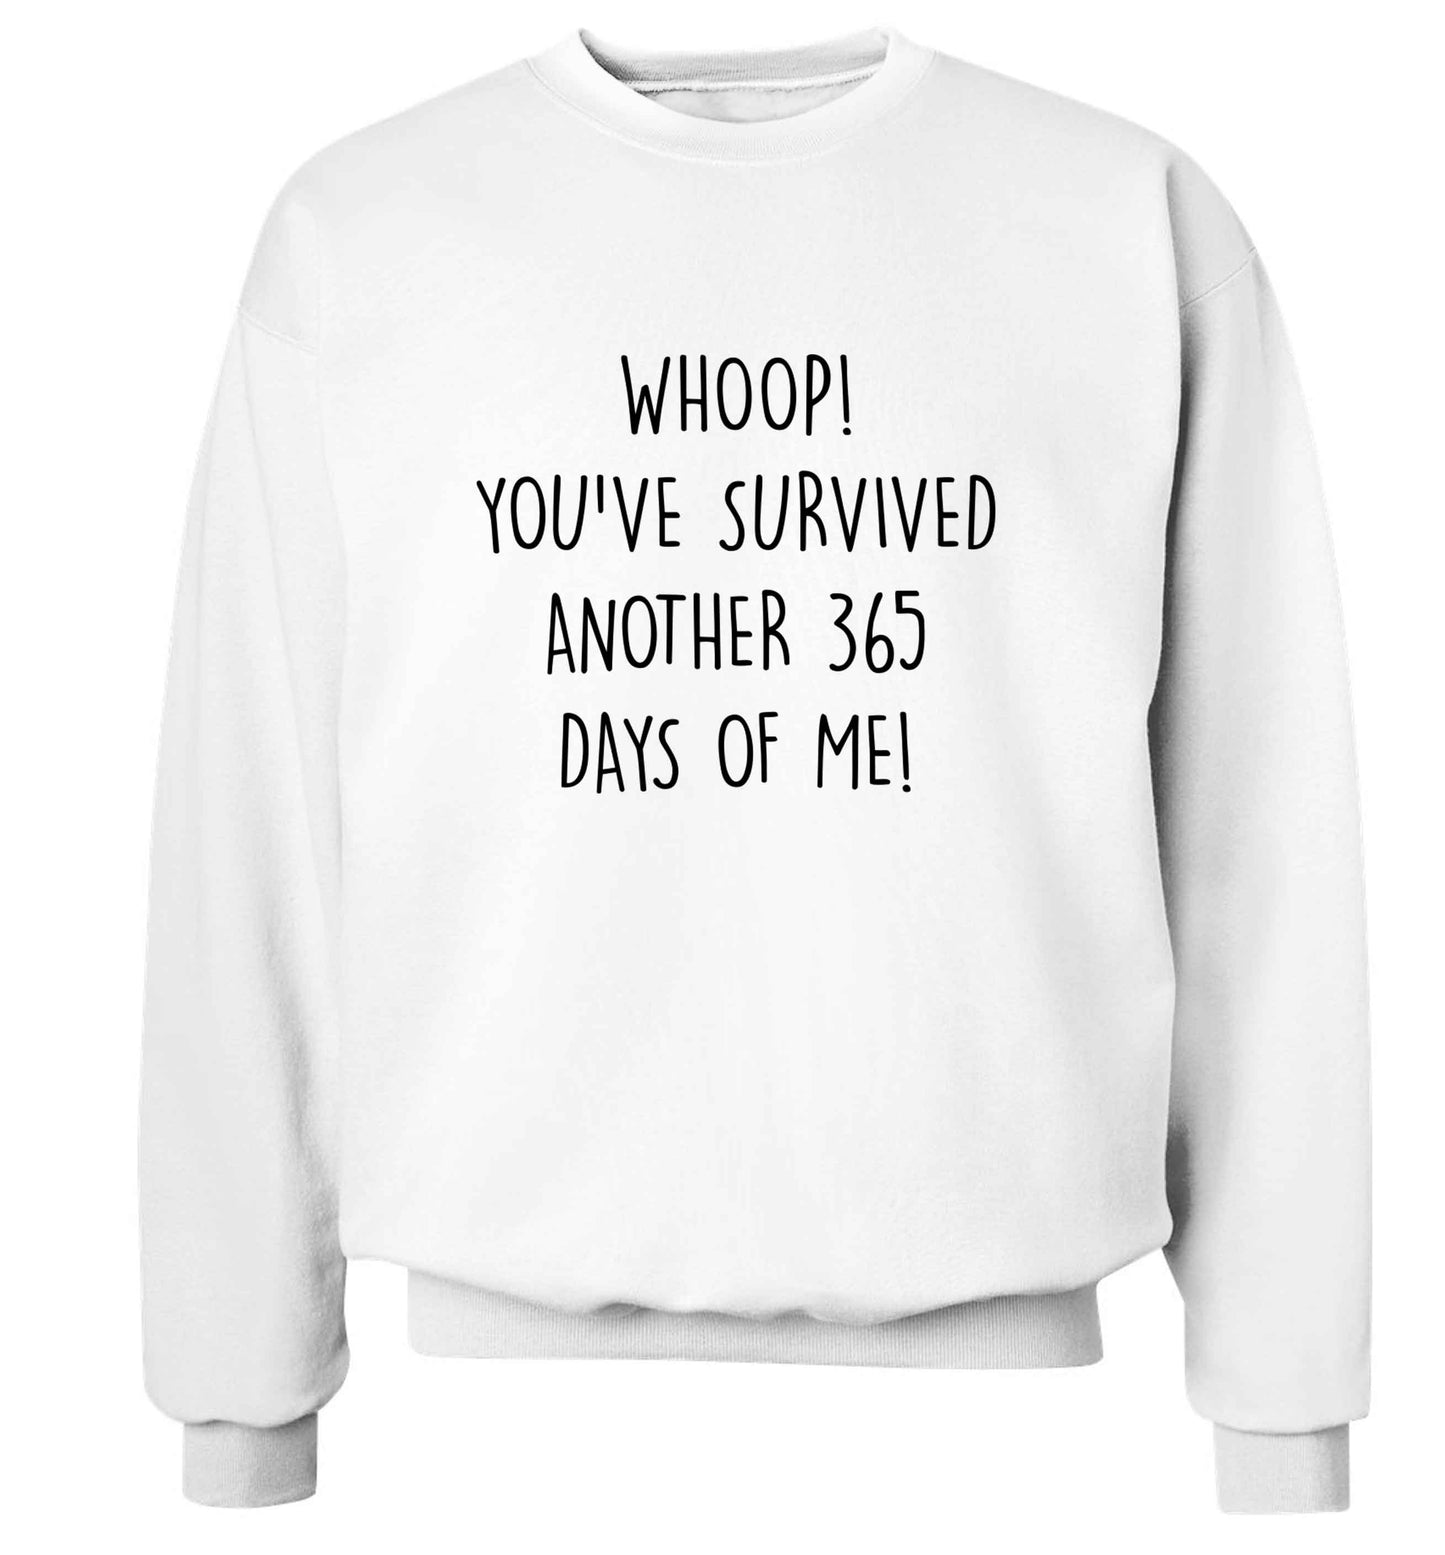 Whoop! You've survived another 365 days with me! adult's unisex white sweater 2XL